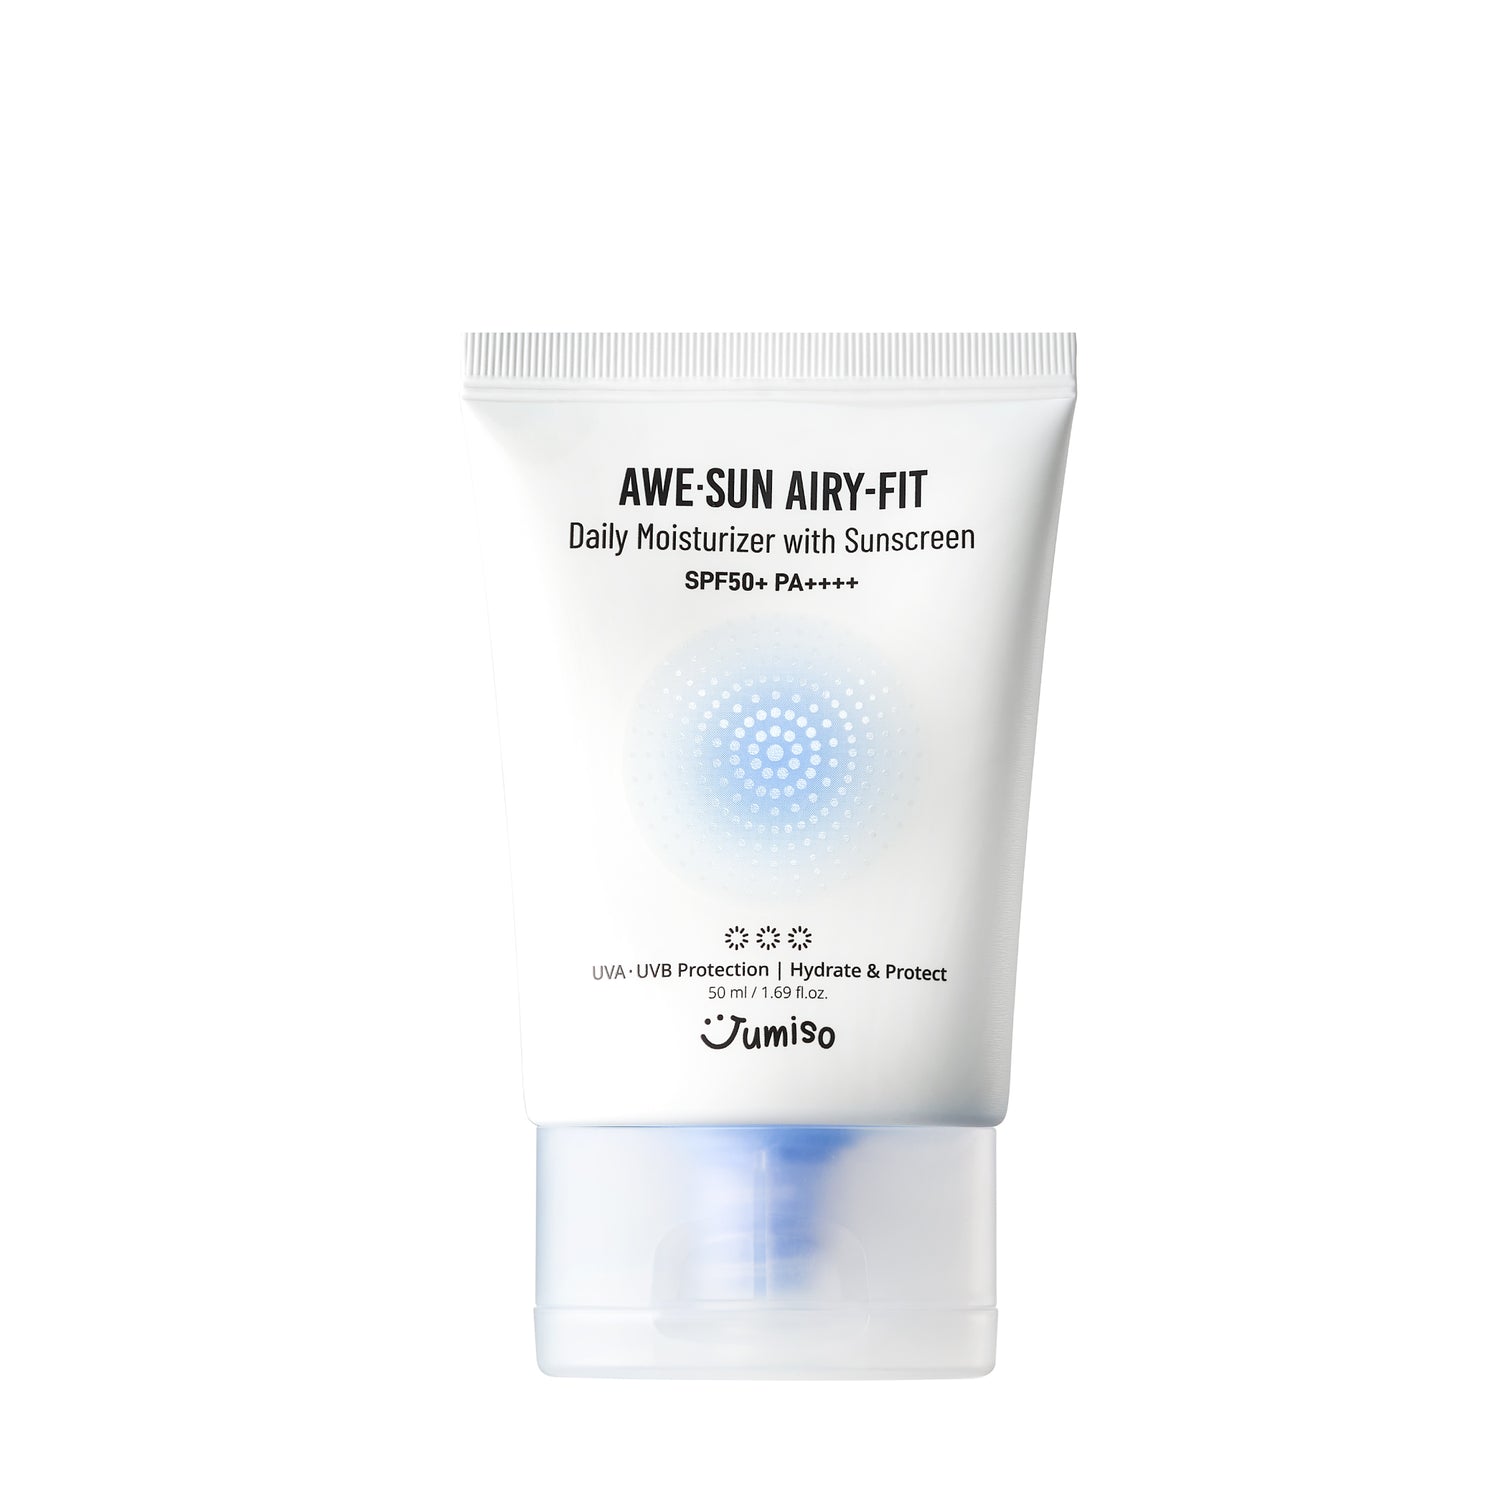 AWE⋅SUN AIRY-FIT Daily Moisturizer with Sunscreen SPF50+ PA++++ 50ml